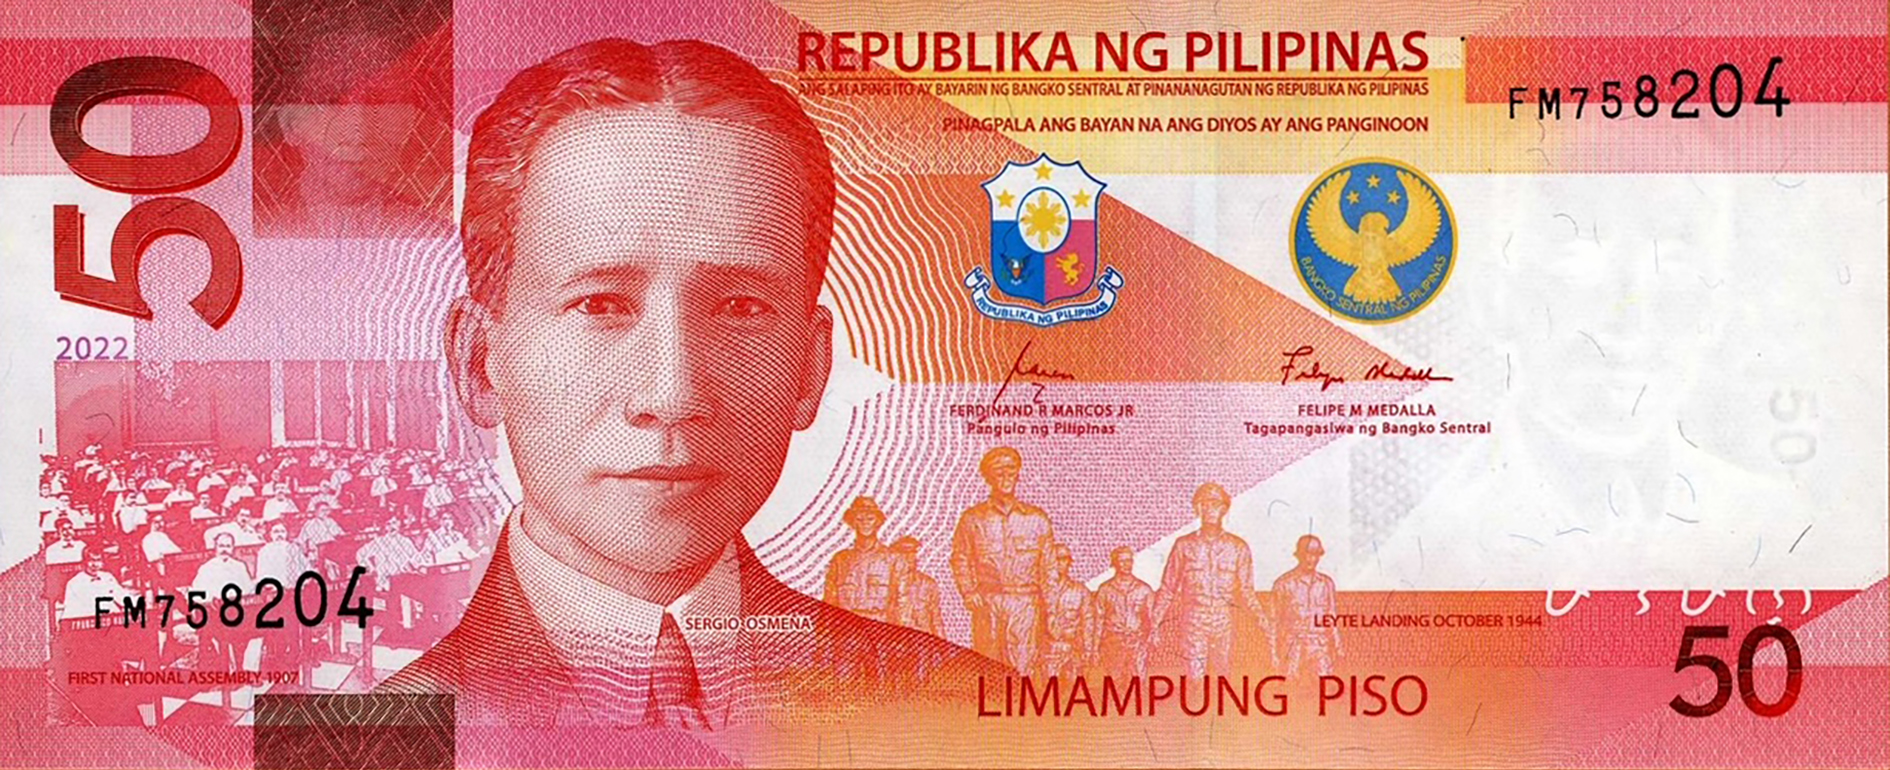 Philippines new 50peso note (B1097a) confirmed BanknoteNews